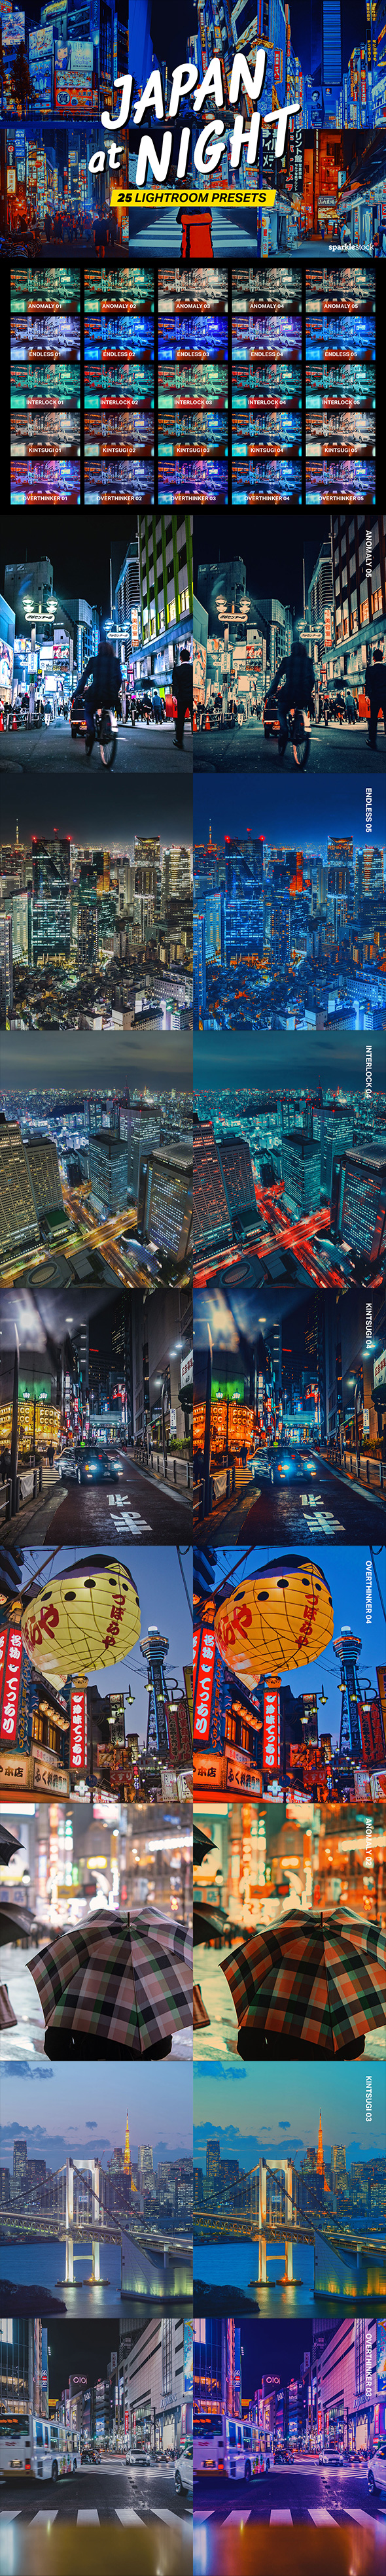 [DOWNLOAD]25 Japan at Night Lightroom Presets and LUTs